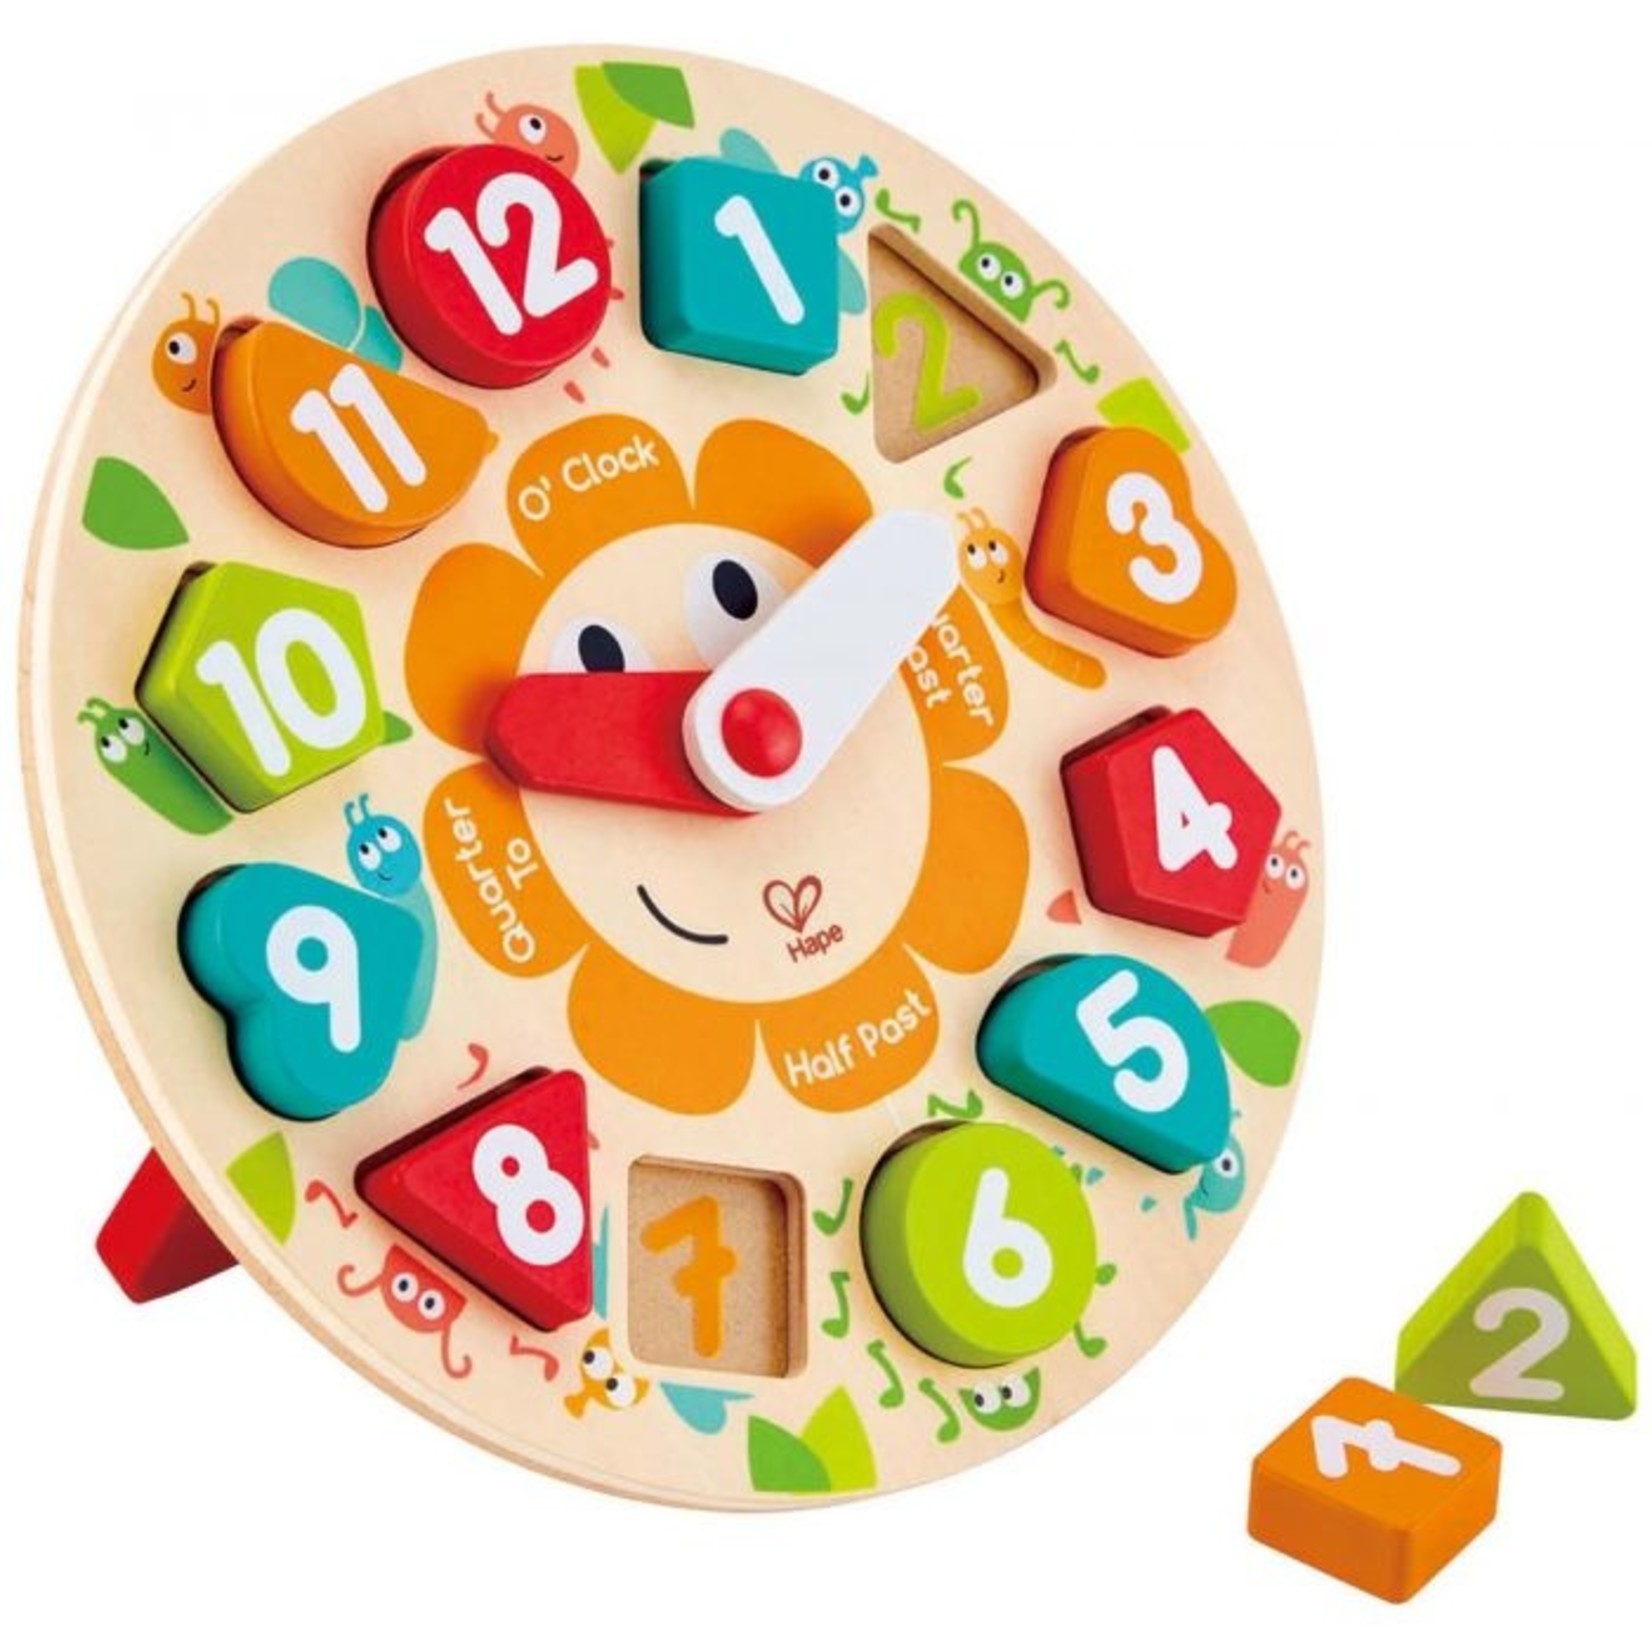 Hape Chunky Wooden Clock Puzzle